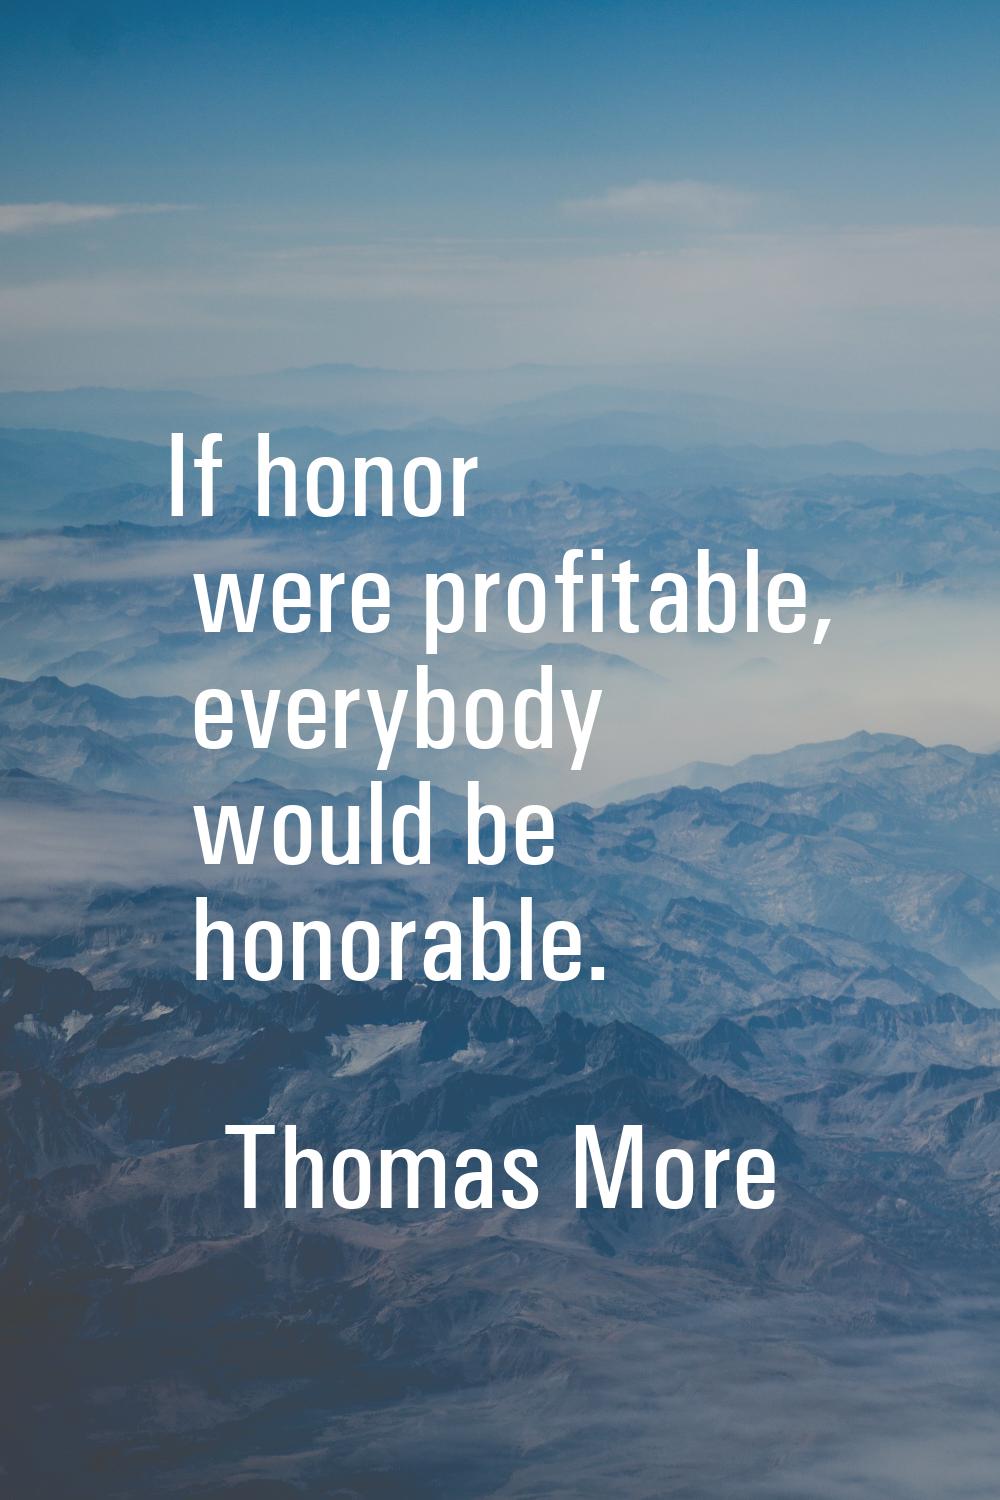 If honor were profitable, everybody would be honorable.